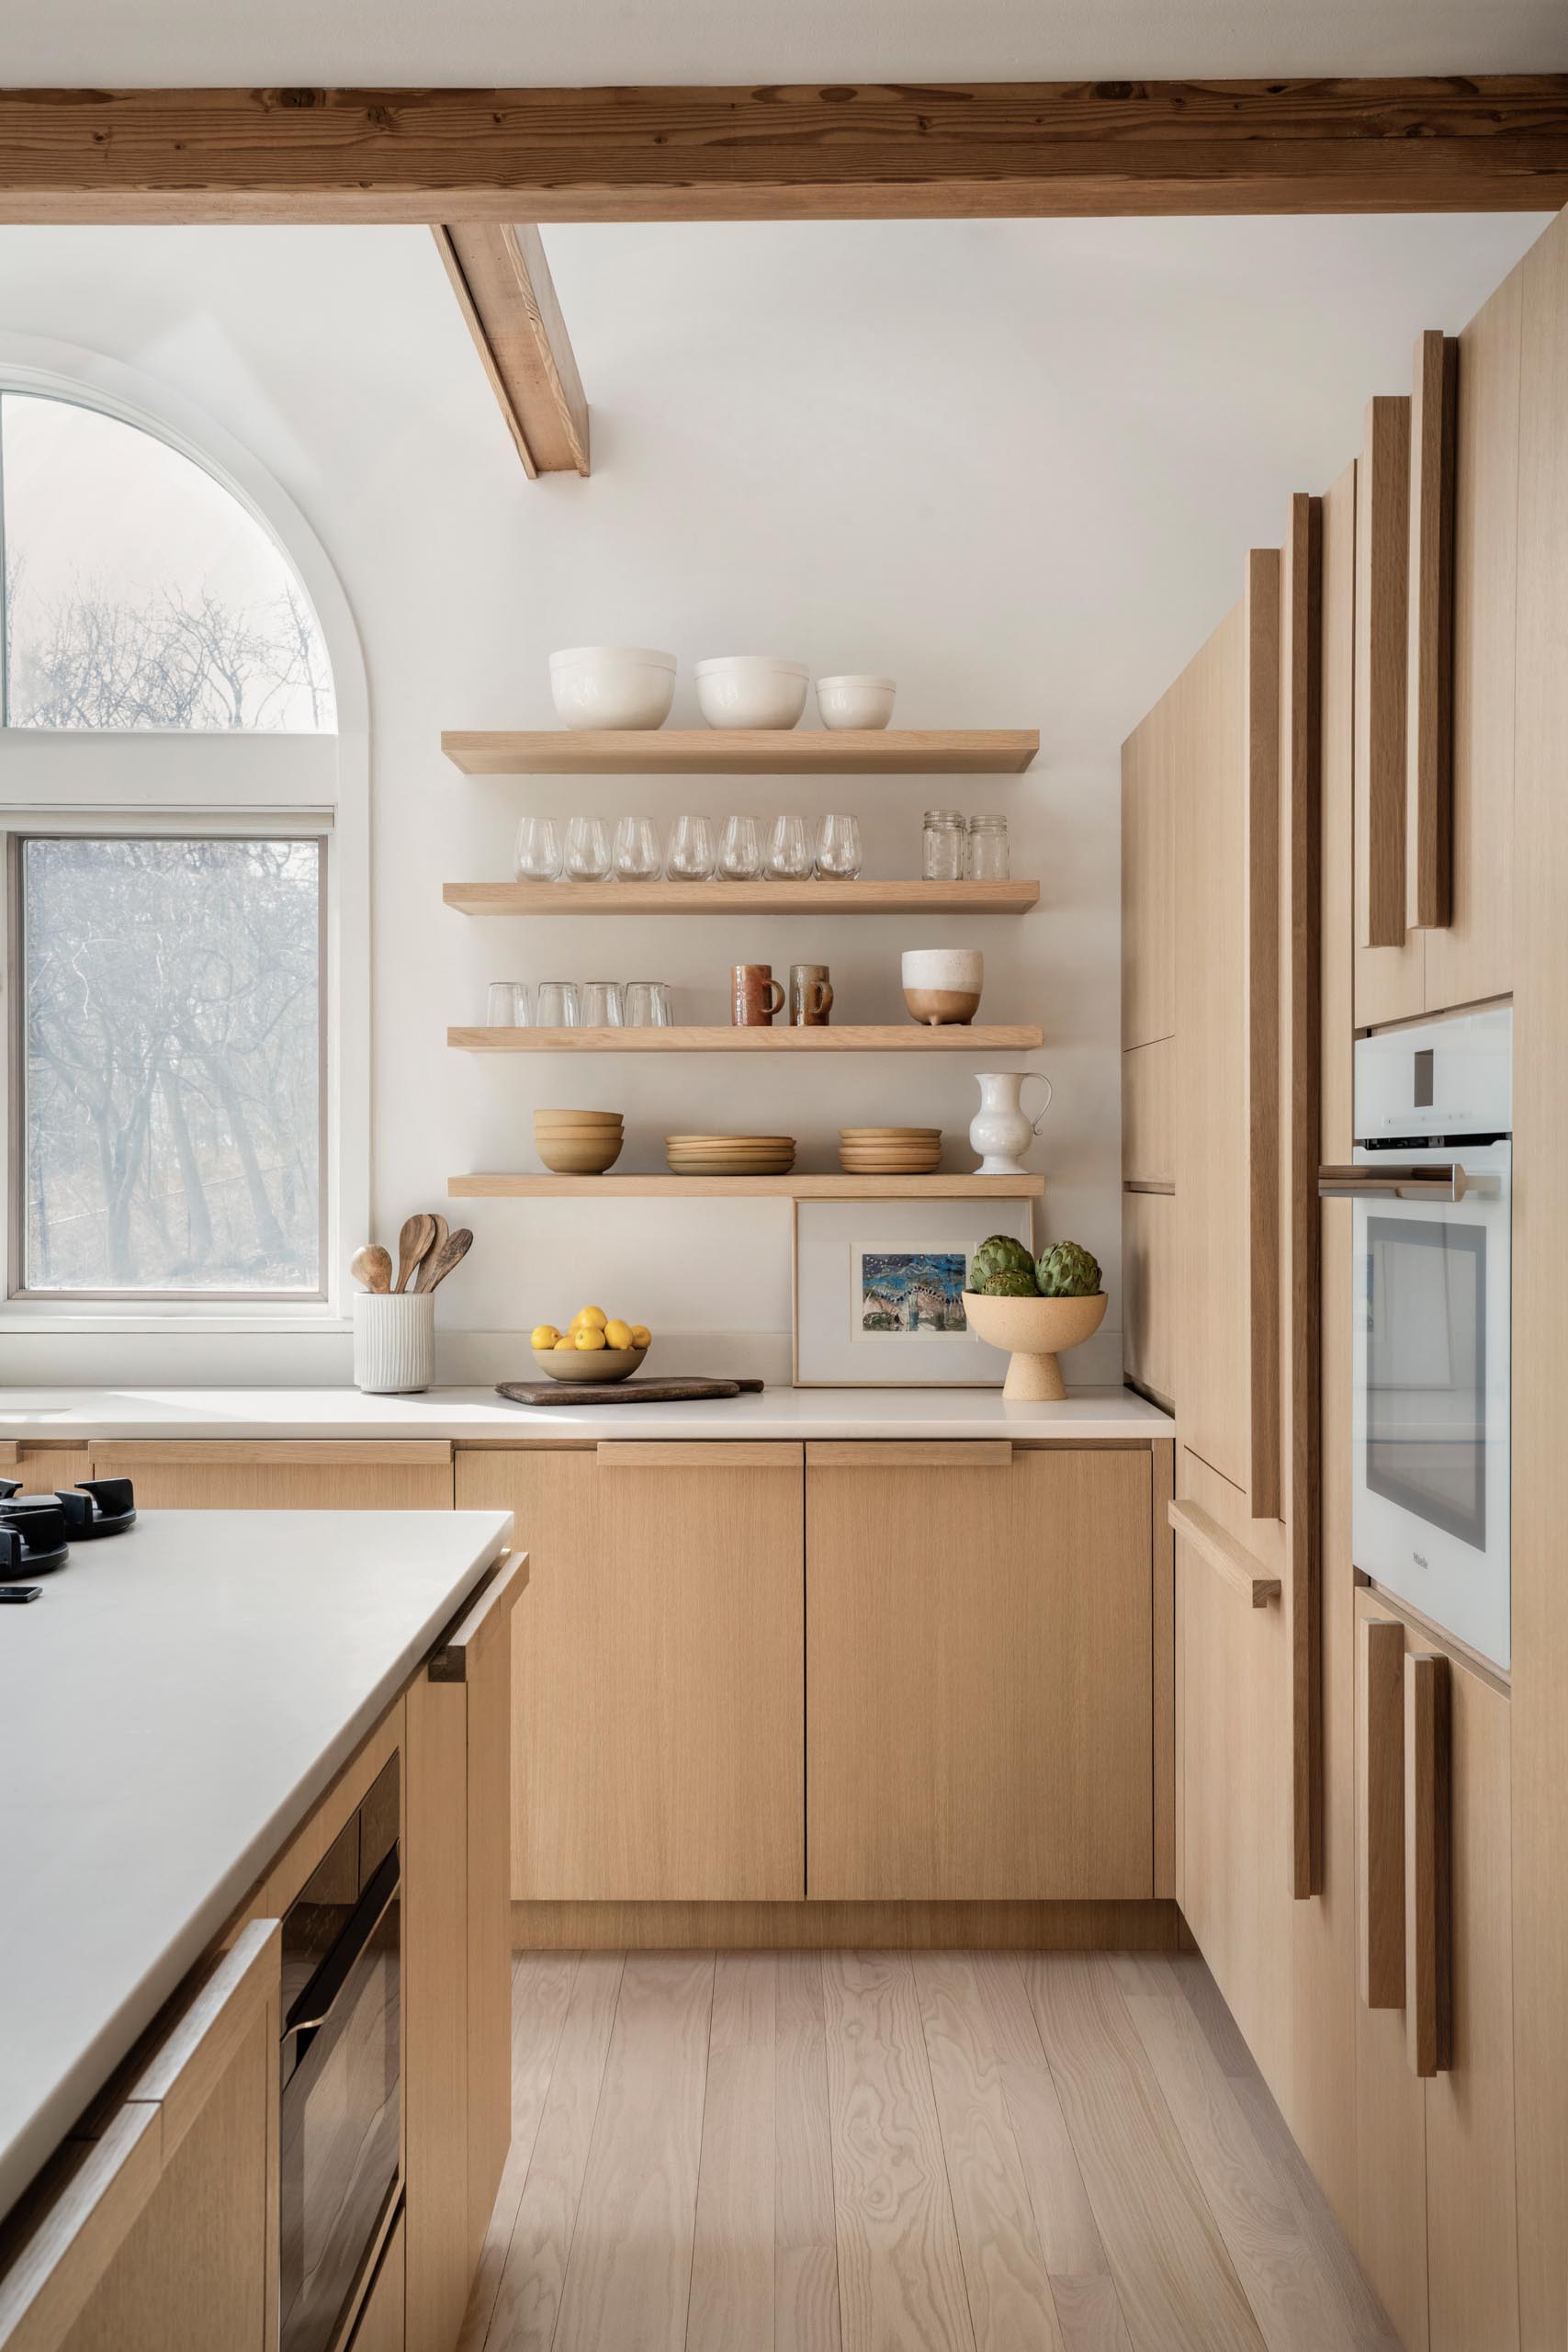 A remodeled kitchen with water-based white rift oak for the cabinets, open shelving, a large island, and quartz countertops.